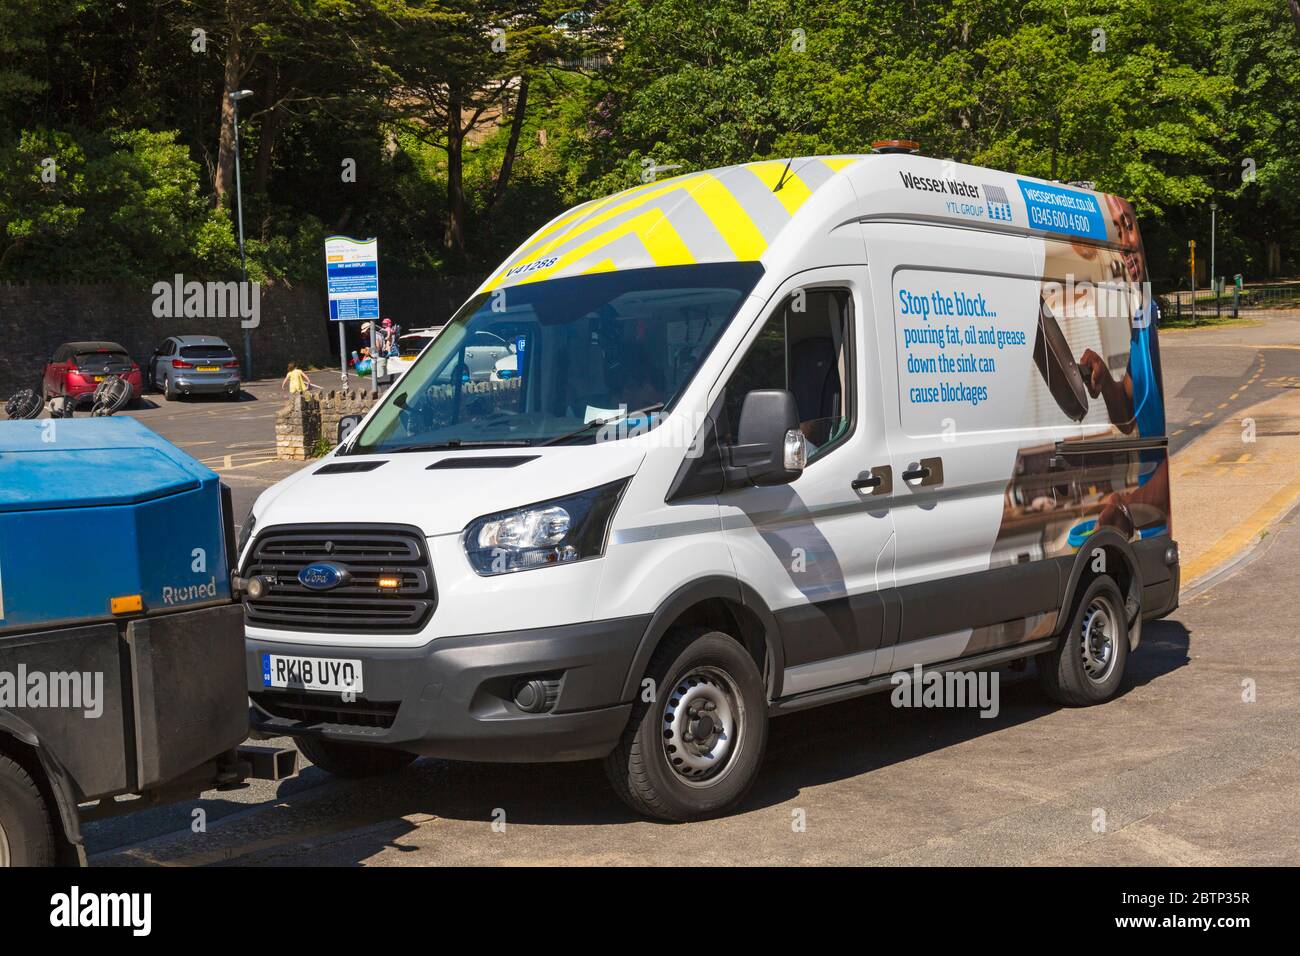 Stop the block, pouring fat oil and grease down the sink can cause blockages - info on Wessex Water YTL Group vehicle at Bournemouth, Dorset UK in May Stock Photo